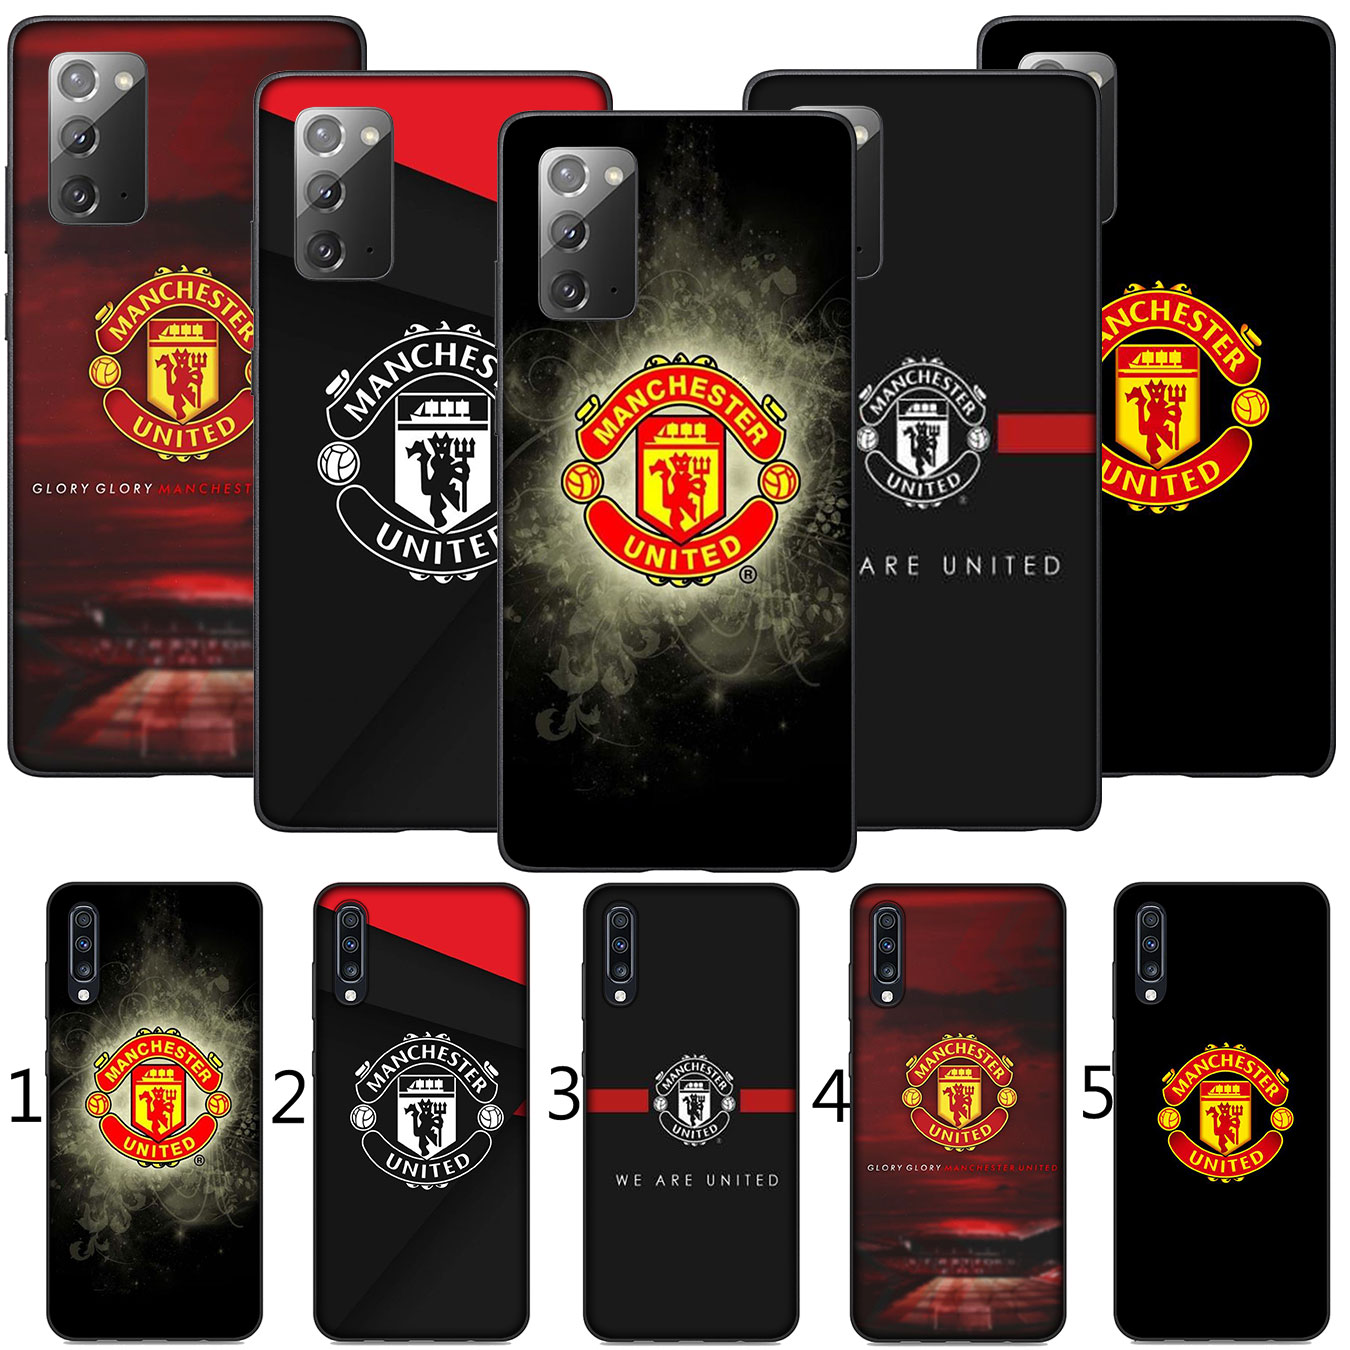 iPhone 12 Mini 11 Max Pro SE 2020 XR Phone Case Soft Silicone Casing Manchester United